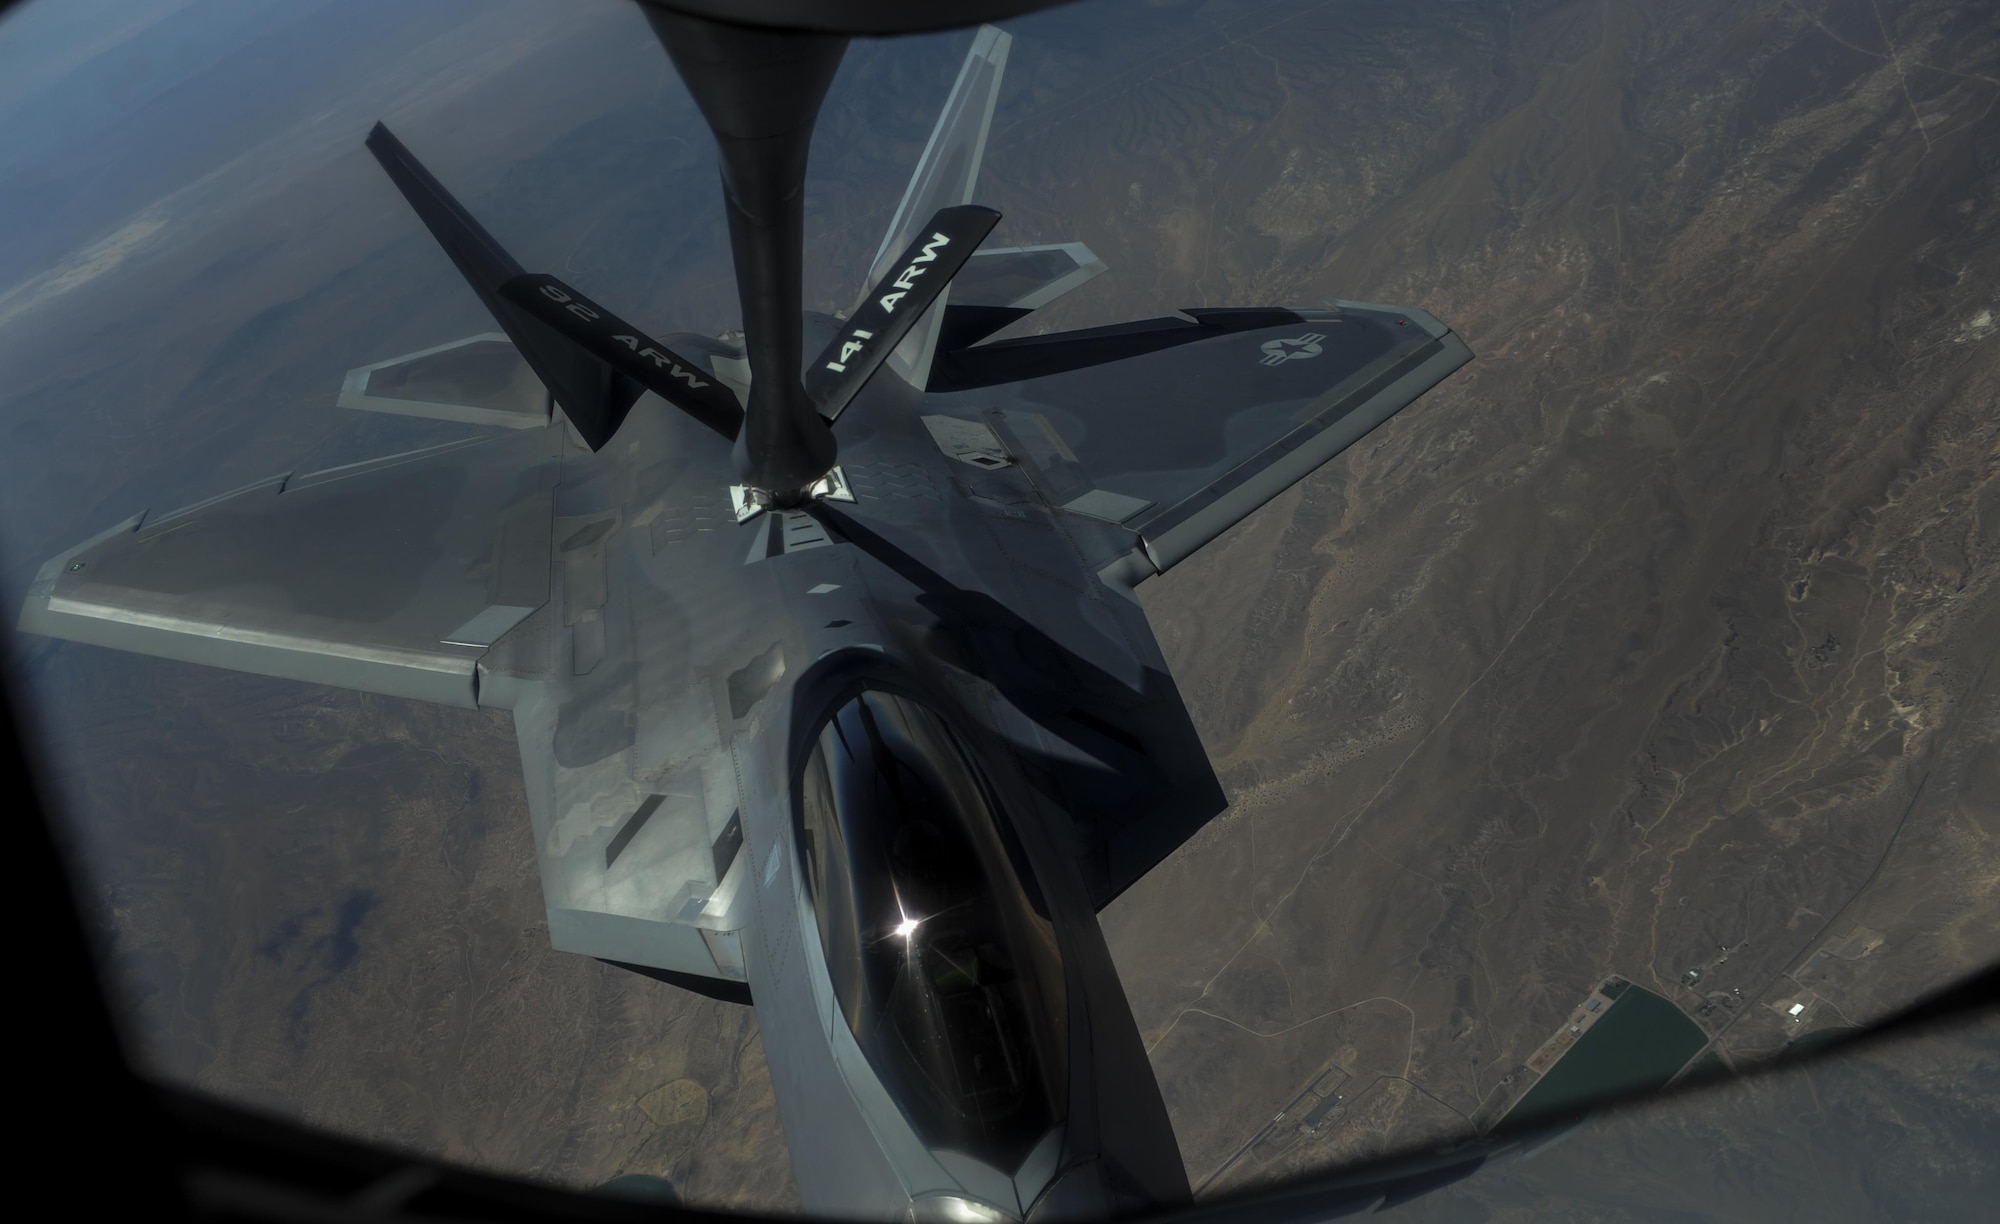 An F-22A Raptor, assigned to the 27th Fighter Squadron, Joint Base Langley-Eustis, Va., is refueled in-air by a KC-135 Stratotanker during Red Flag 16-3 over the Nevada Test and Training Range, Nev., July 27, 2016. In addition to providing fuels for aircraft in mid-air, the KC-135 can carry up to 83,000 pounds of cargo. (U.S. Air Force photo by Airman 1st Class Kevin Tanenbaum/Released)